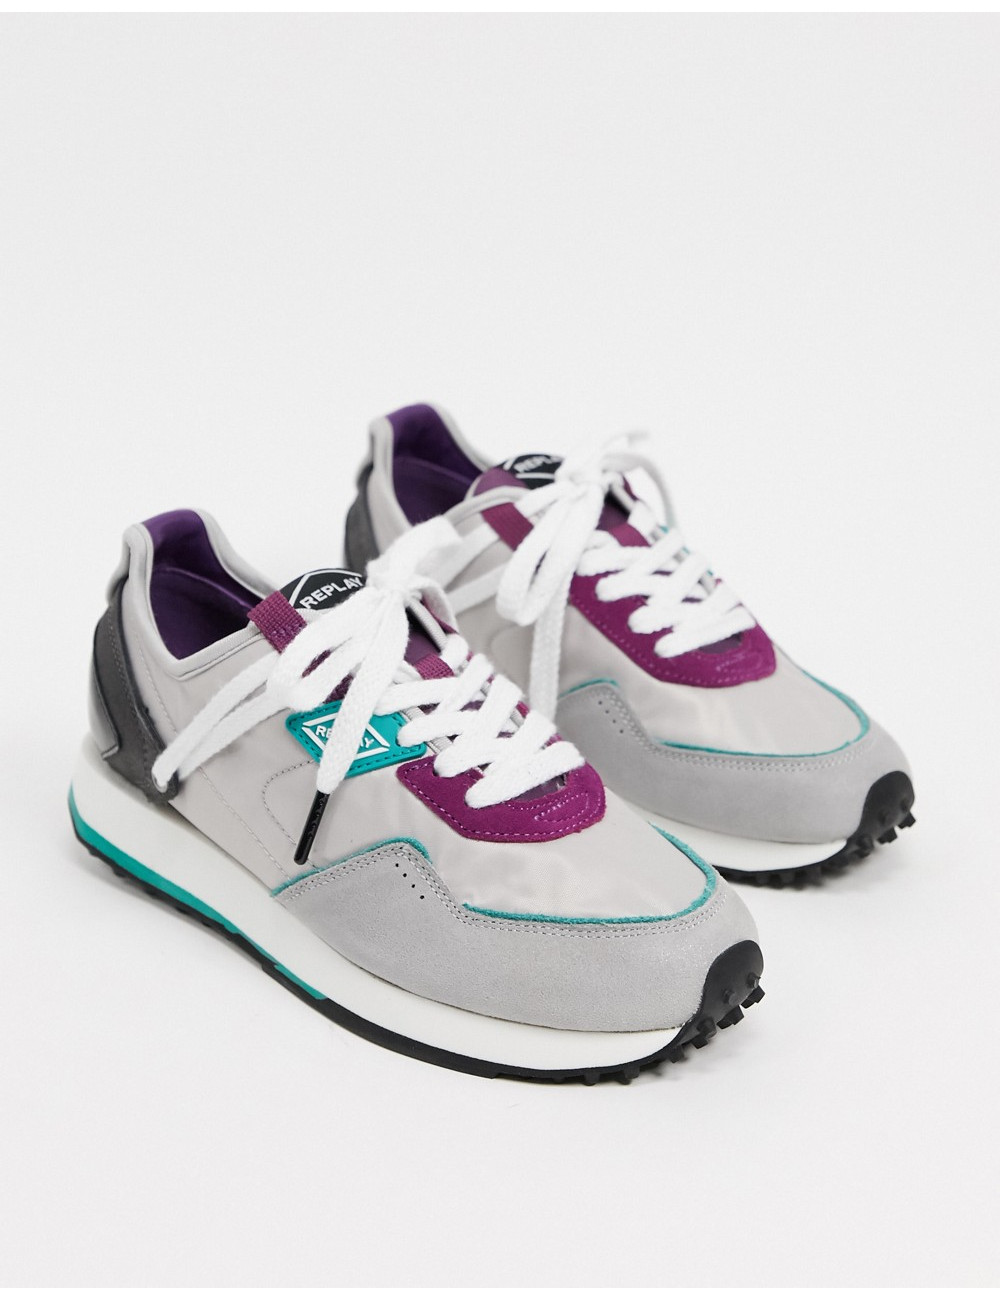 Replay Colourblock Trainers